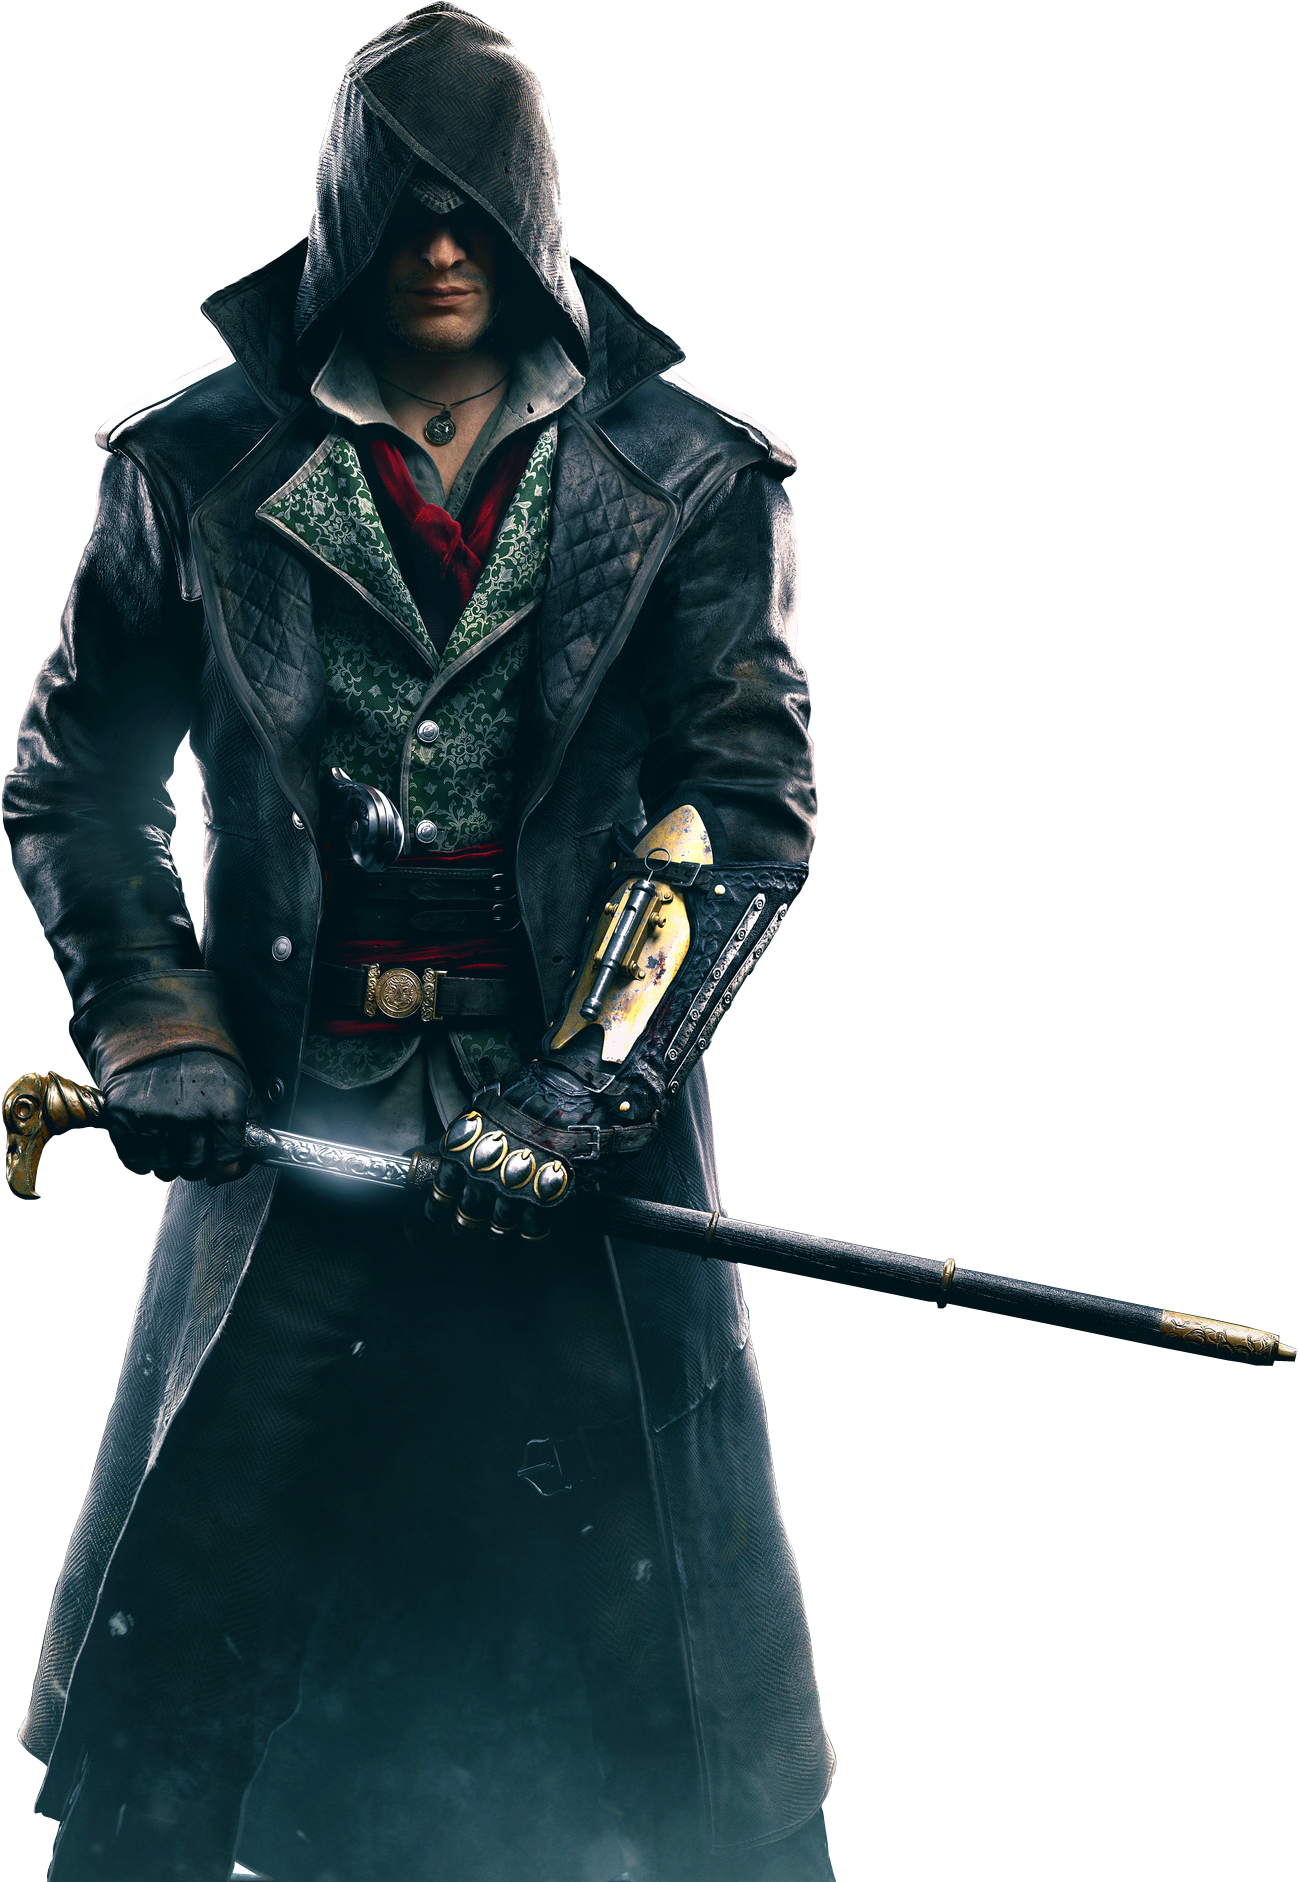 Assassins Creed Characterwith Hidden Bladeand Cane Sword